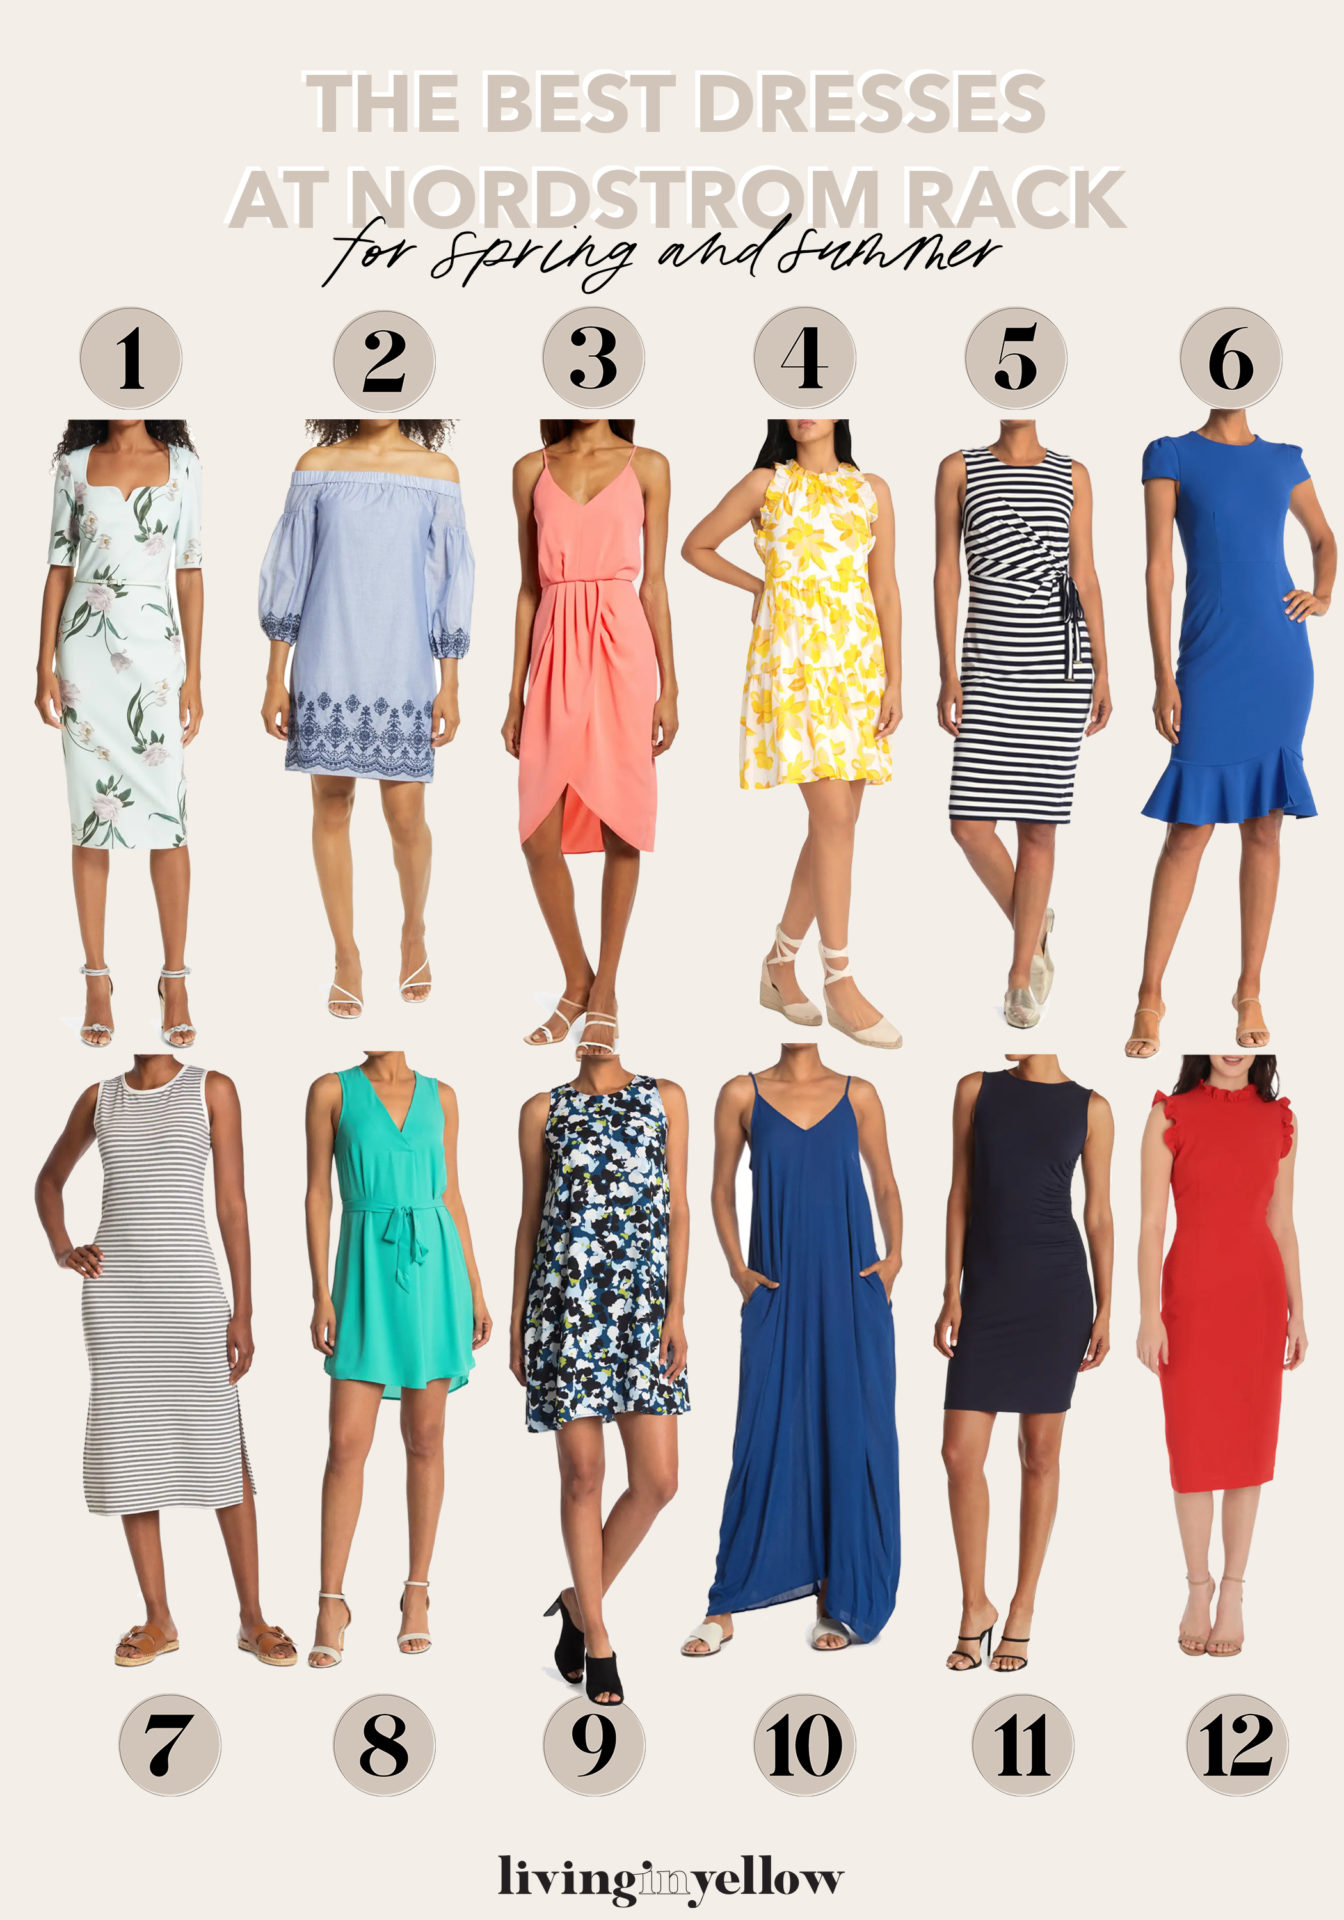 12 Dresses for Spring \u0026 Summer - Living in Yellow